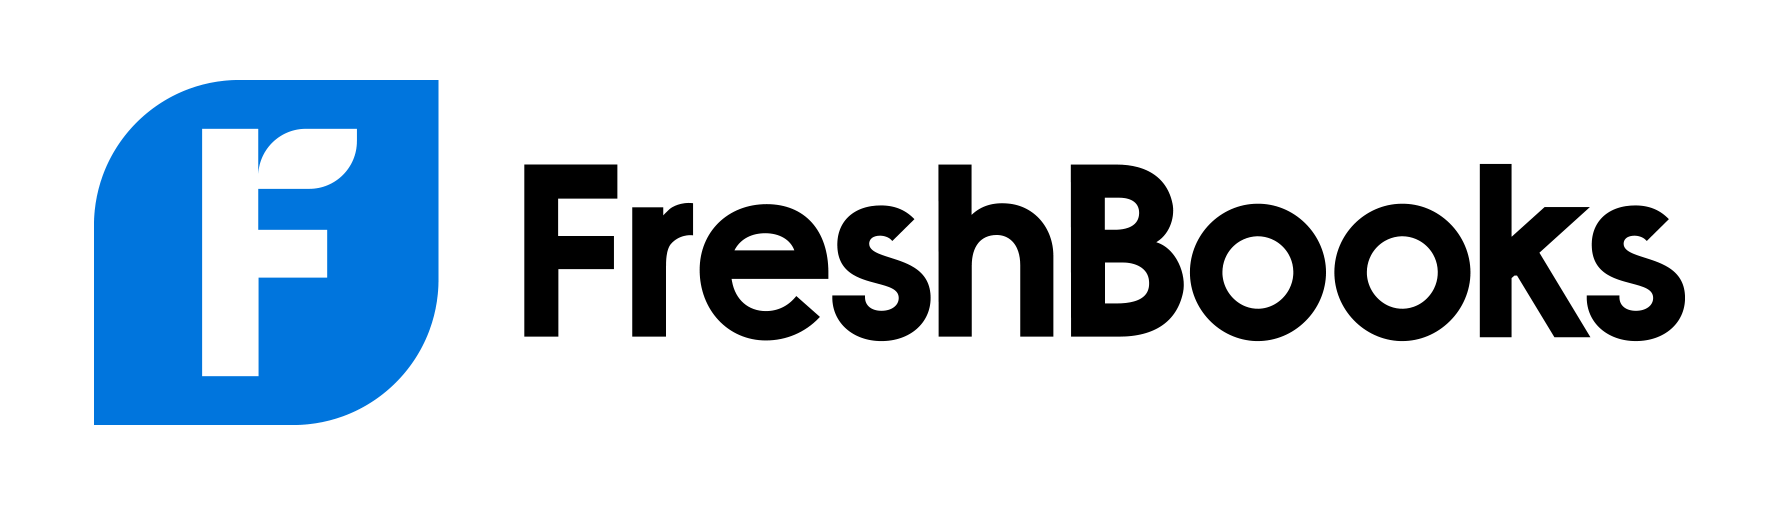 freshbooks cloud accounting software logo